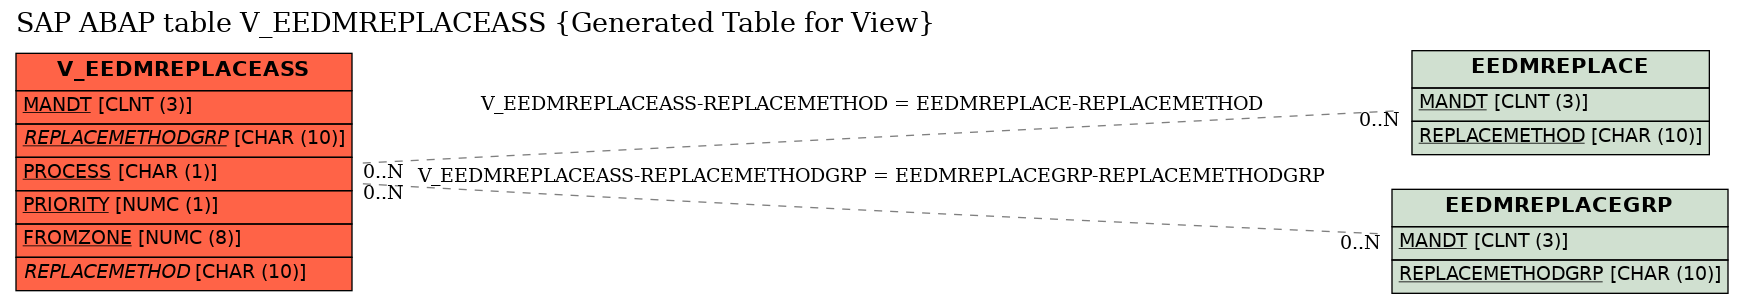 E-R Diagram for table V_EEDMREPLACEASS (Generated Table for View)